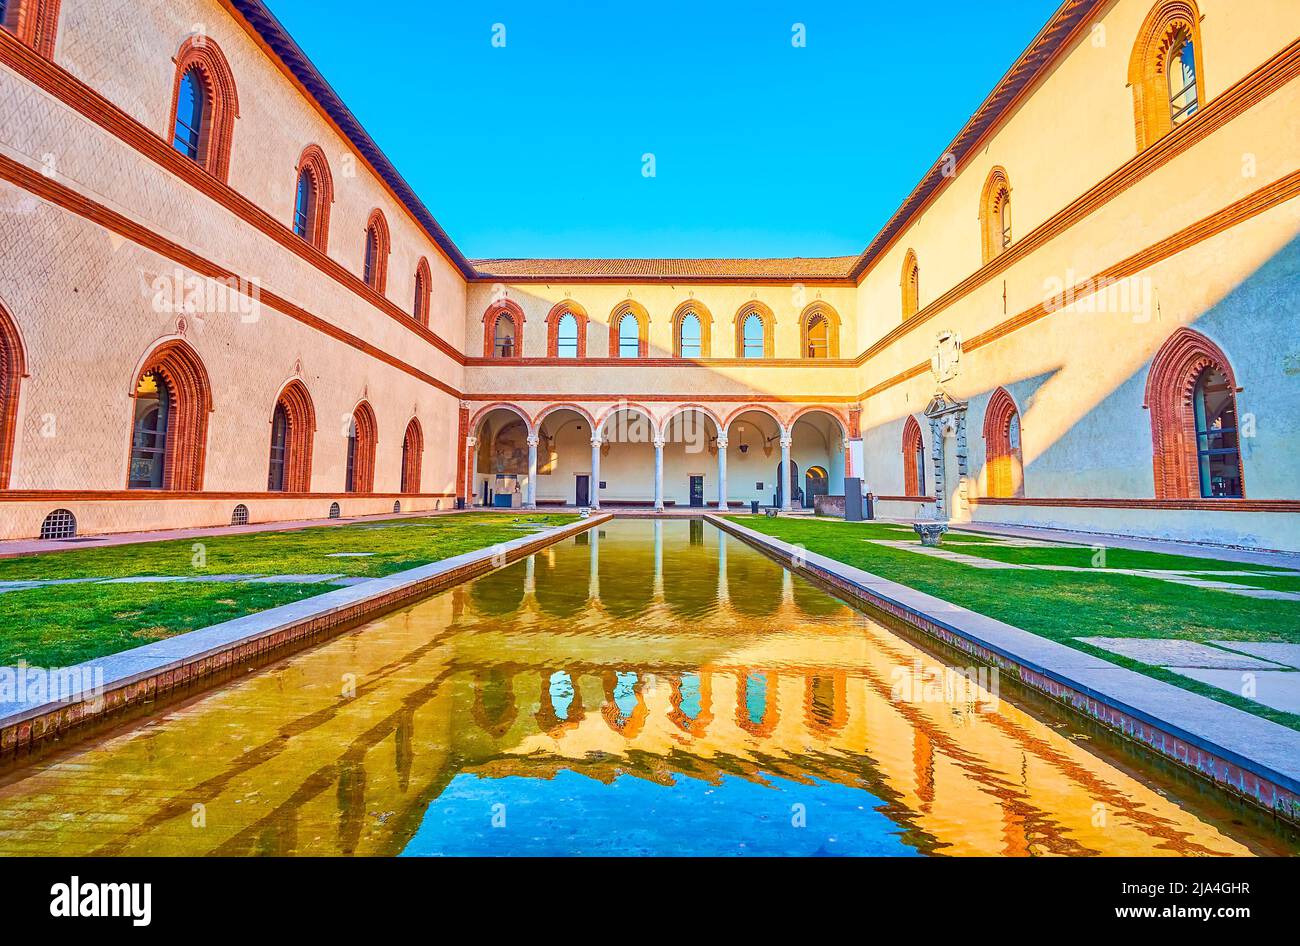 The great reflection of the Renaissance style loggia of Corte Ducale in the water of the pool, Sforza's Castle, Milan, Italy Stock Photo